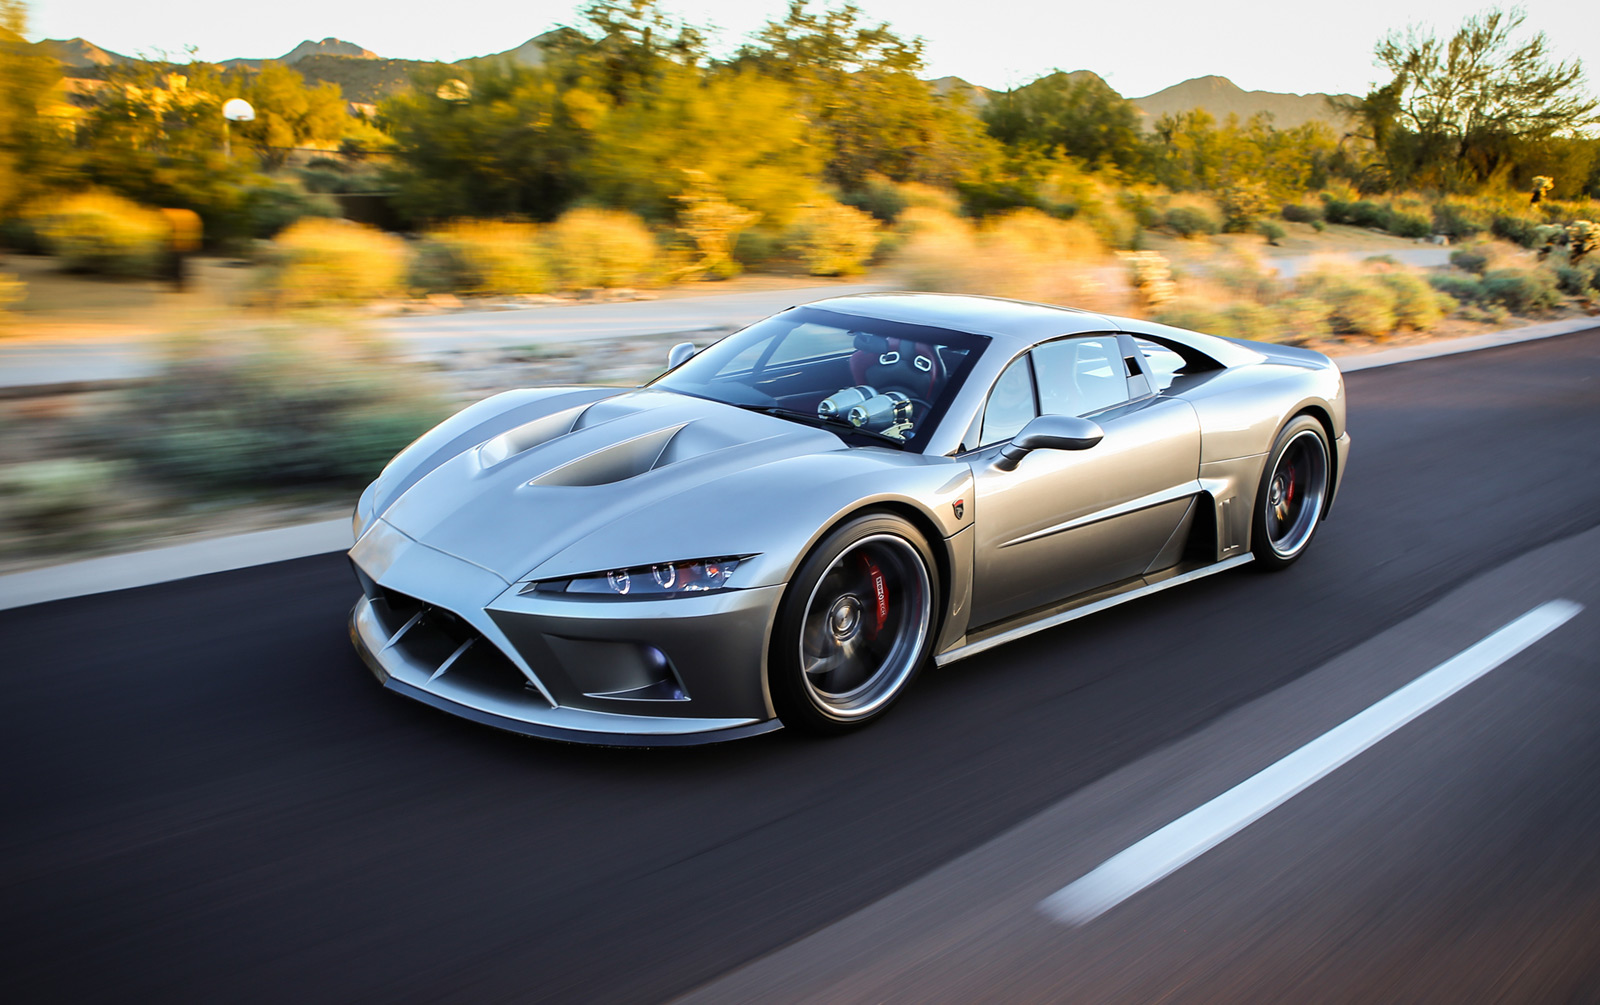 The Falcon F7 0 60 In 2 7 Seconds 1100HP And A Top Speed Of Over 200MPH